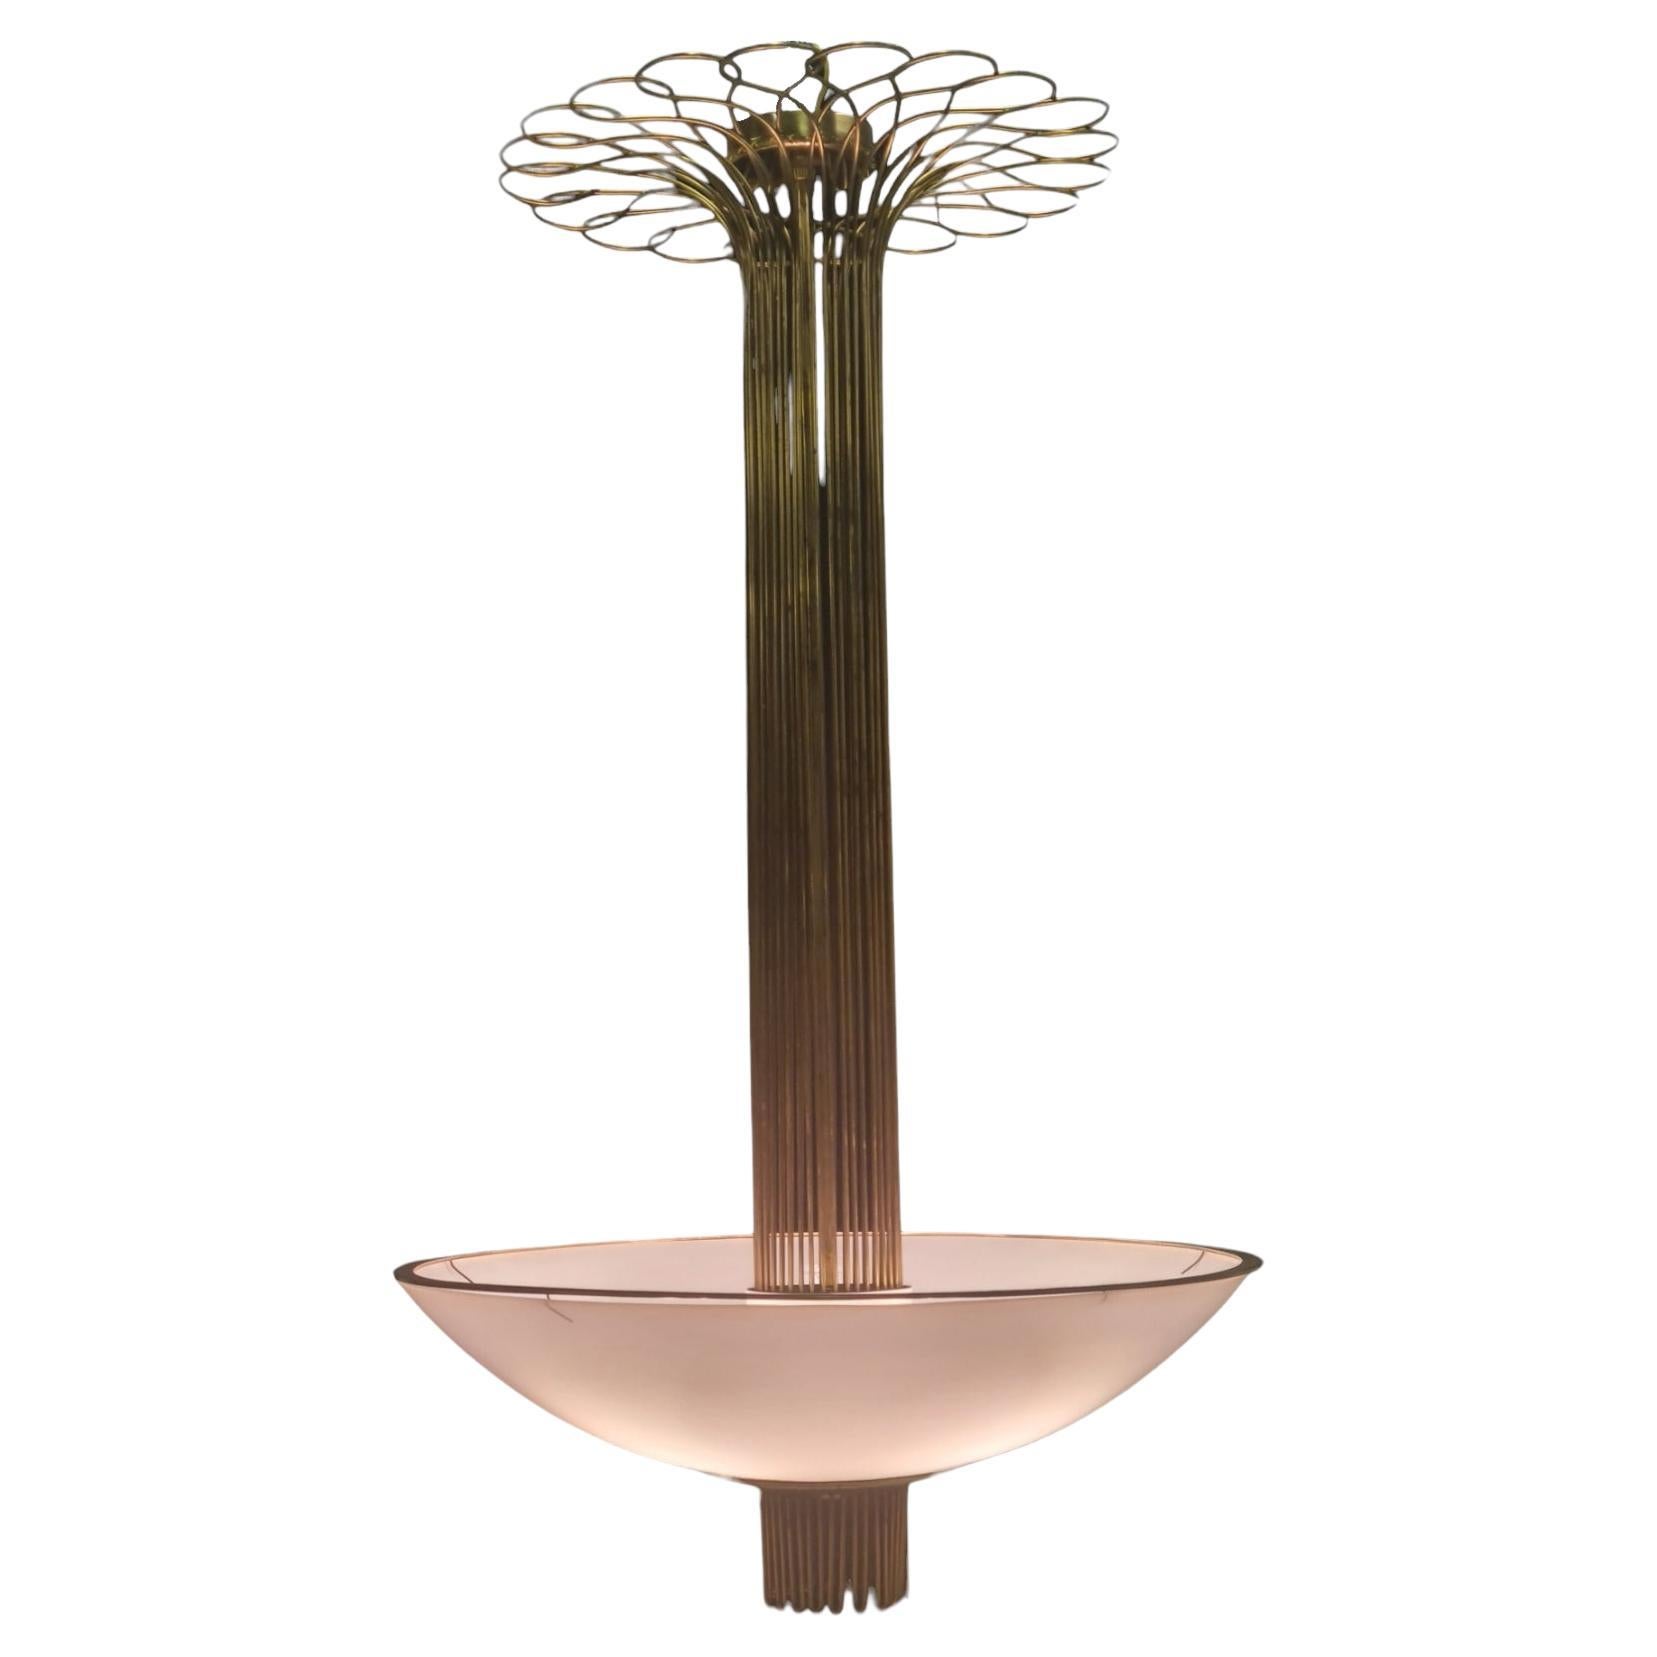 Provenance :- This beautiful ceiling lamp by Paavo Tynell was designed for the MTK (Central Union of Agricultural and Forestry Producers)  seminar building in the city of Espoo at `Northern Lights Street 9`, or `Revontulentis 9, 02100 Espoo) . It